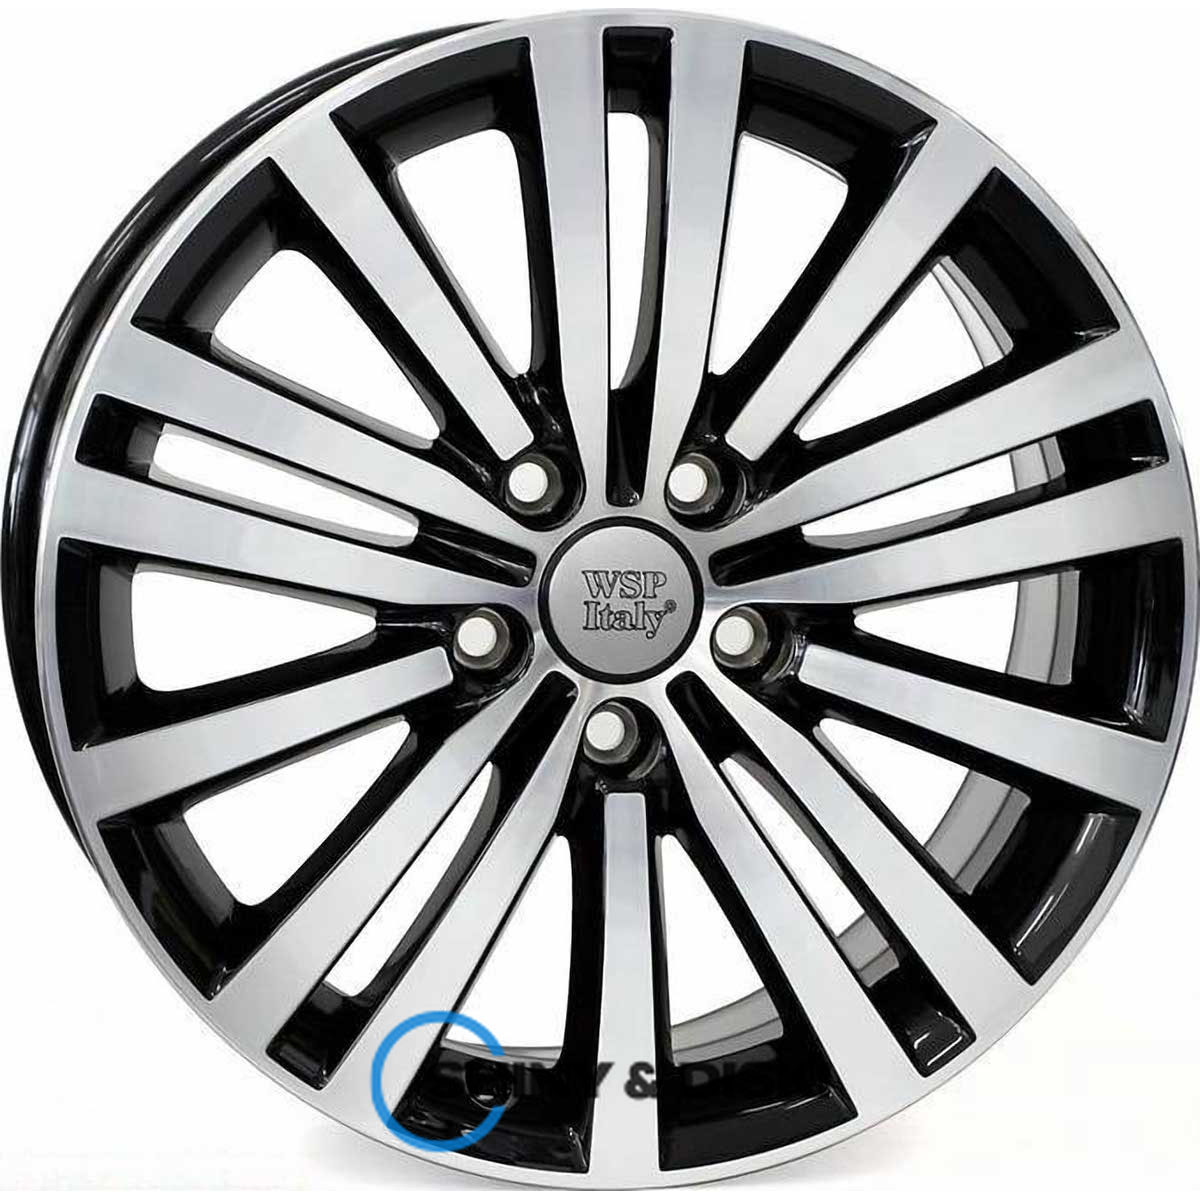 wsp italy volkswagen w462 altair gbp r17 w7.5 pcd5x112 et49 dia57.1